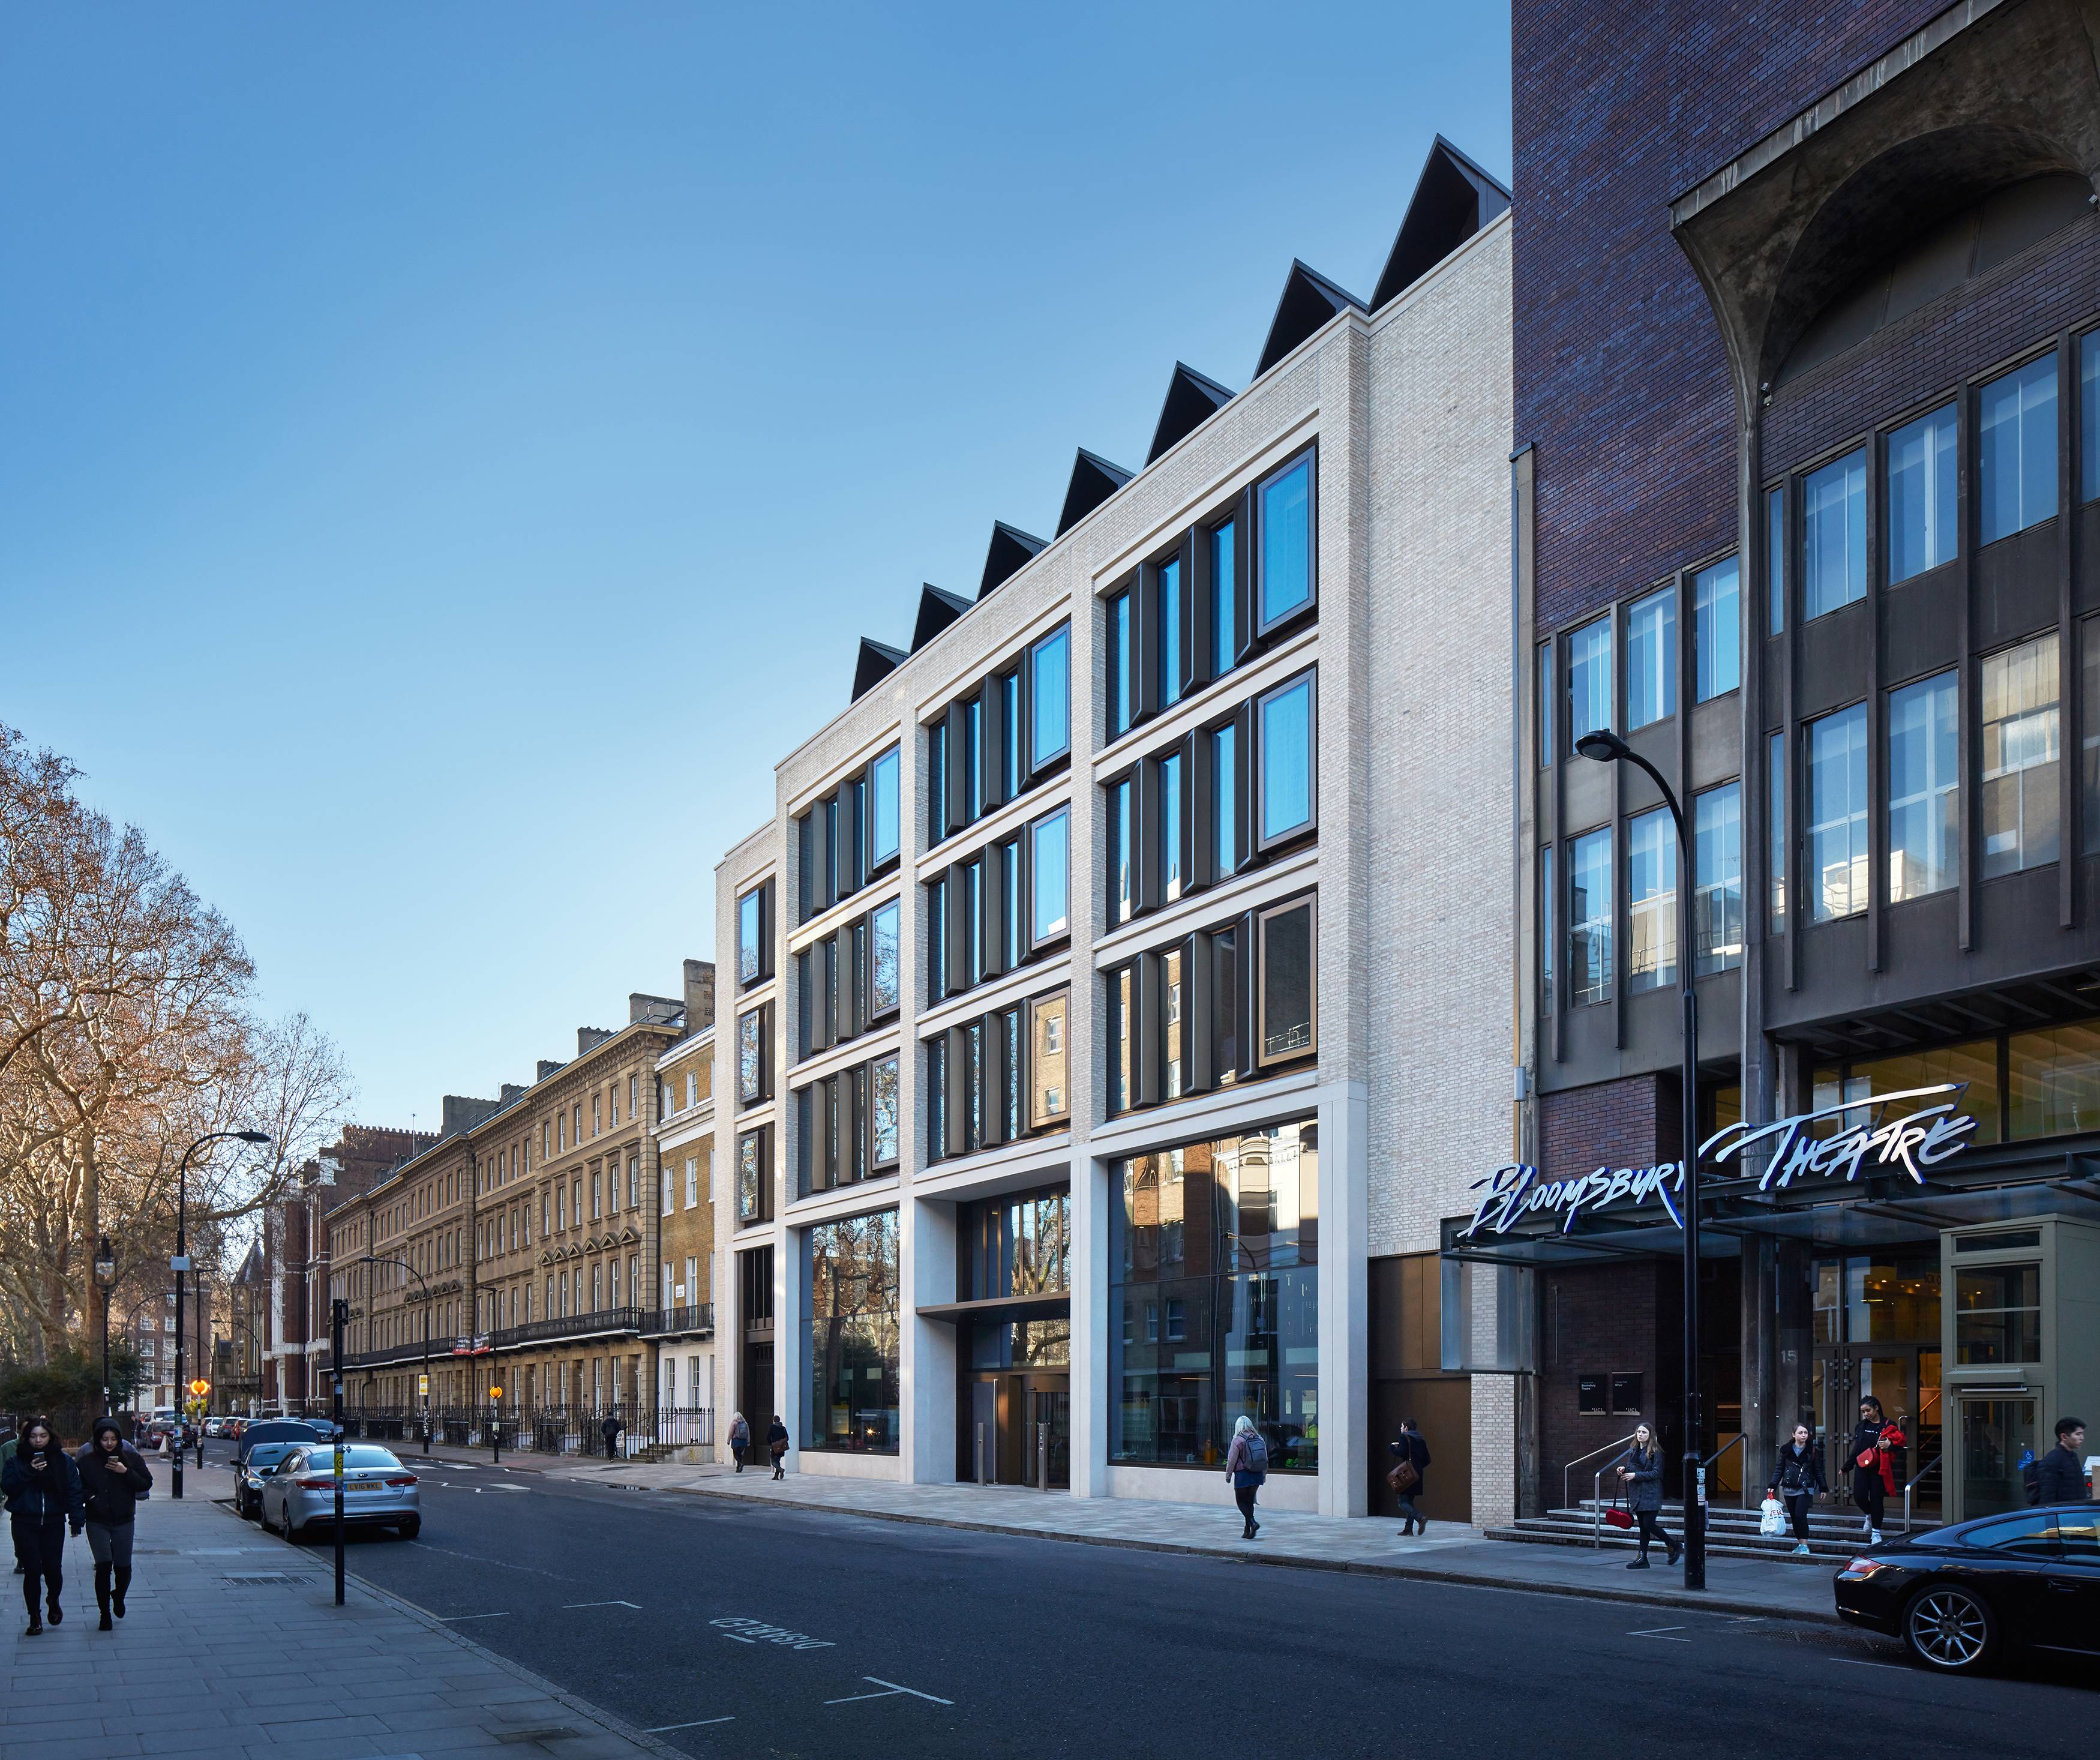 The Student Centre, UCL (London, WC1H) by Nicholas Hare Architects. Photo: Alan Williams